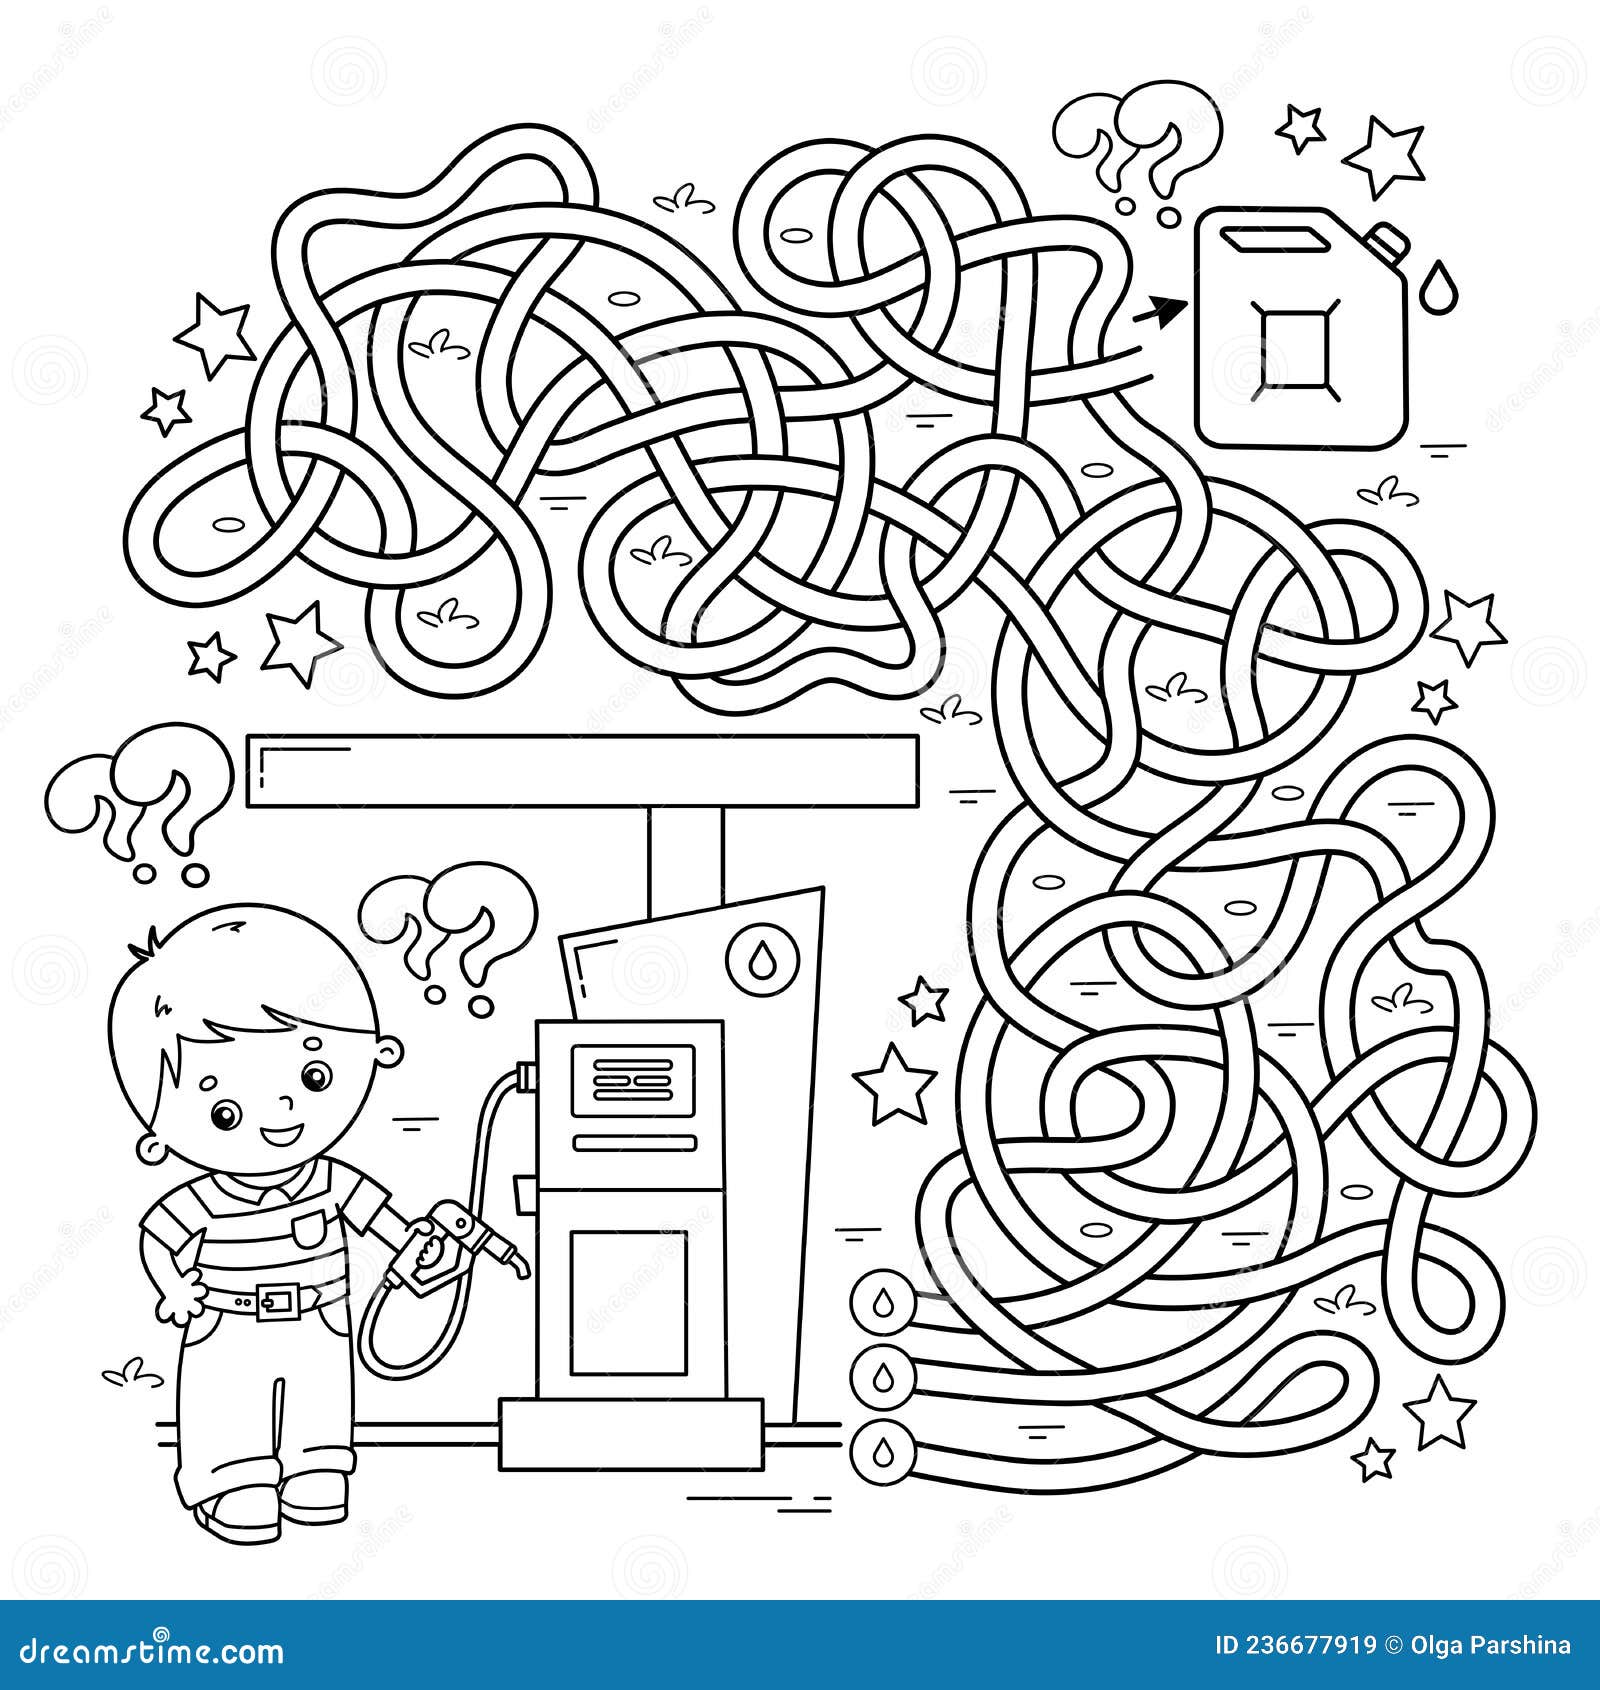 Maze or labyrinth game puzzle tangled road coloring page outline of cartoon driver on petrol station transport or vehicle stock vector